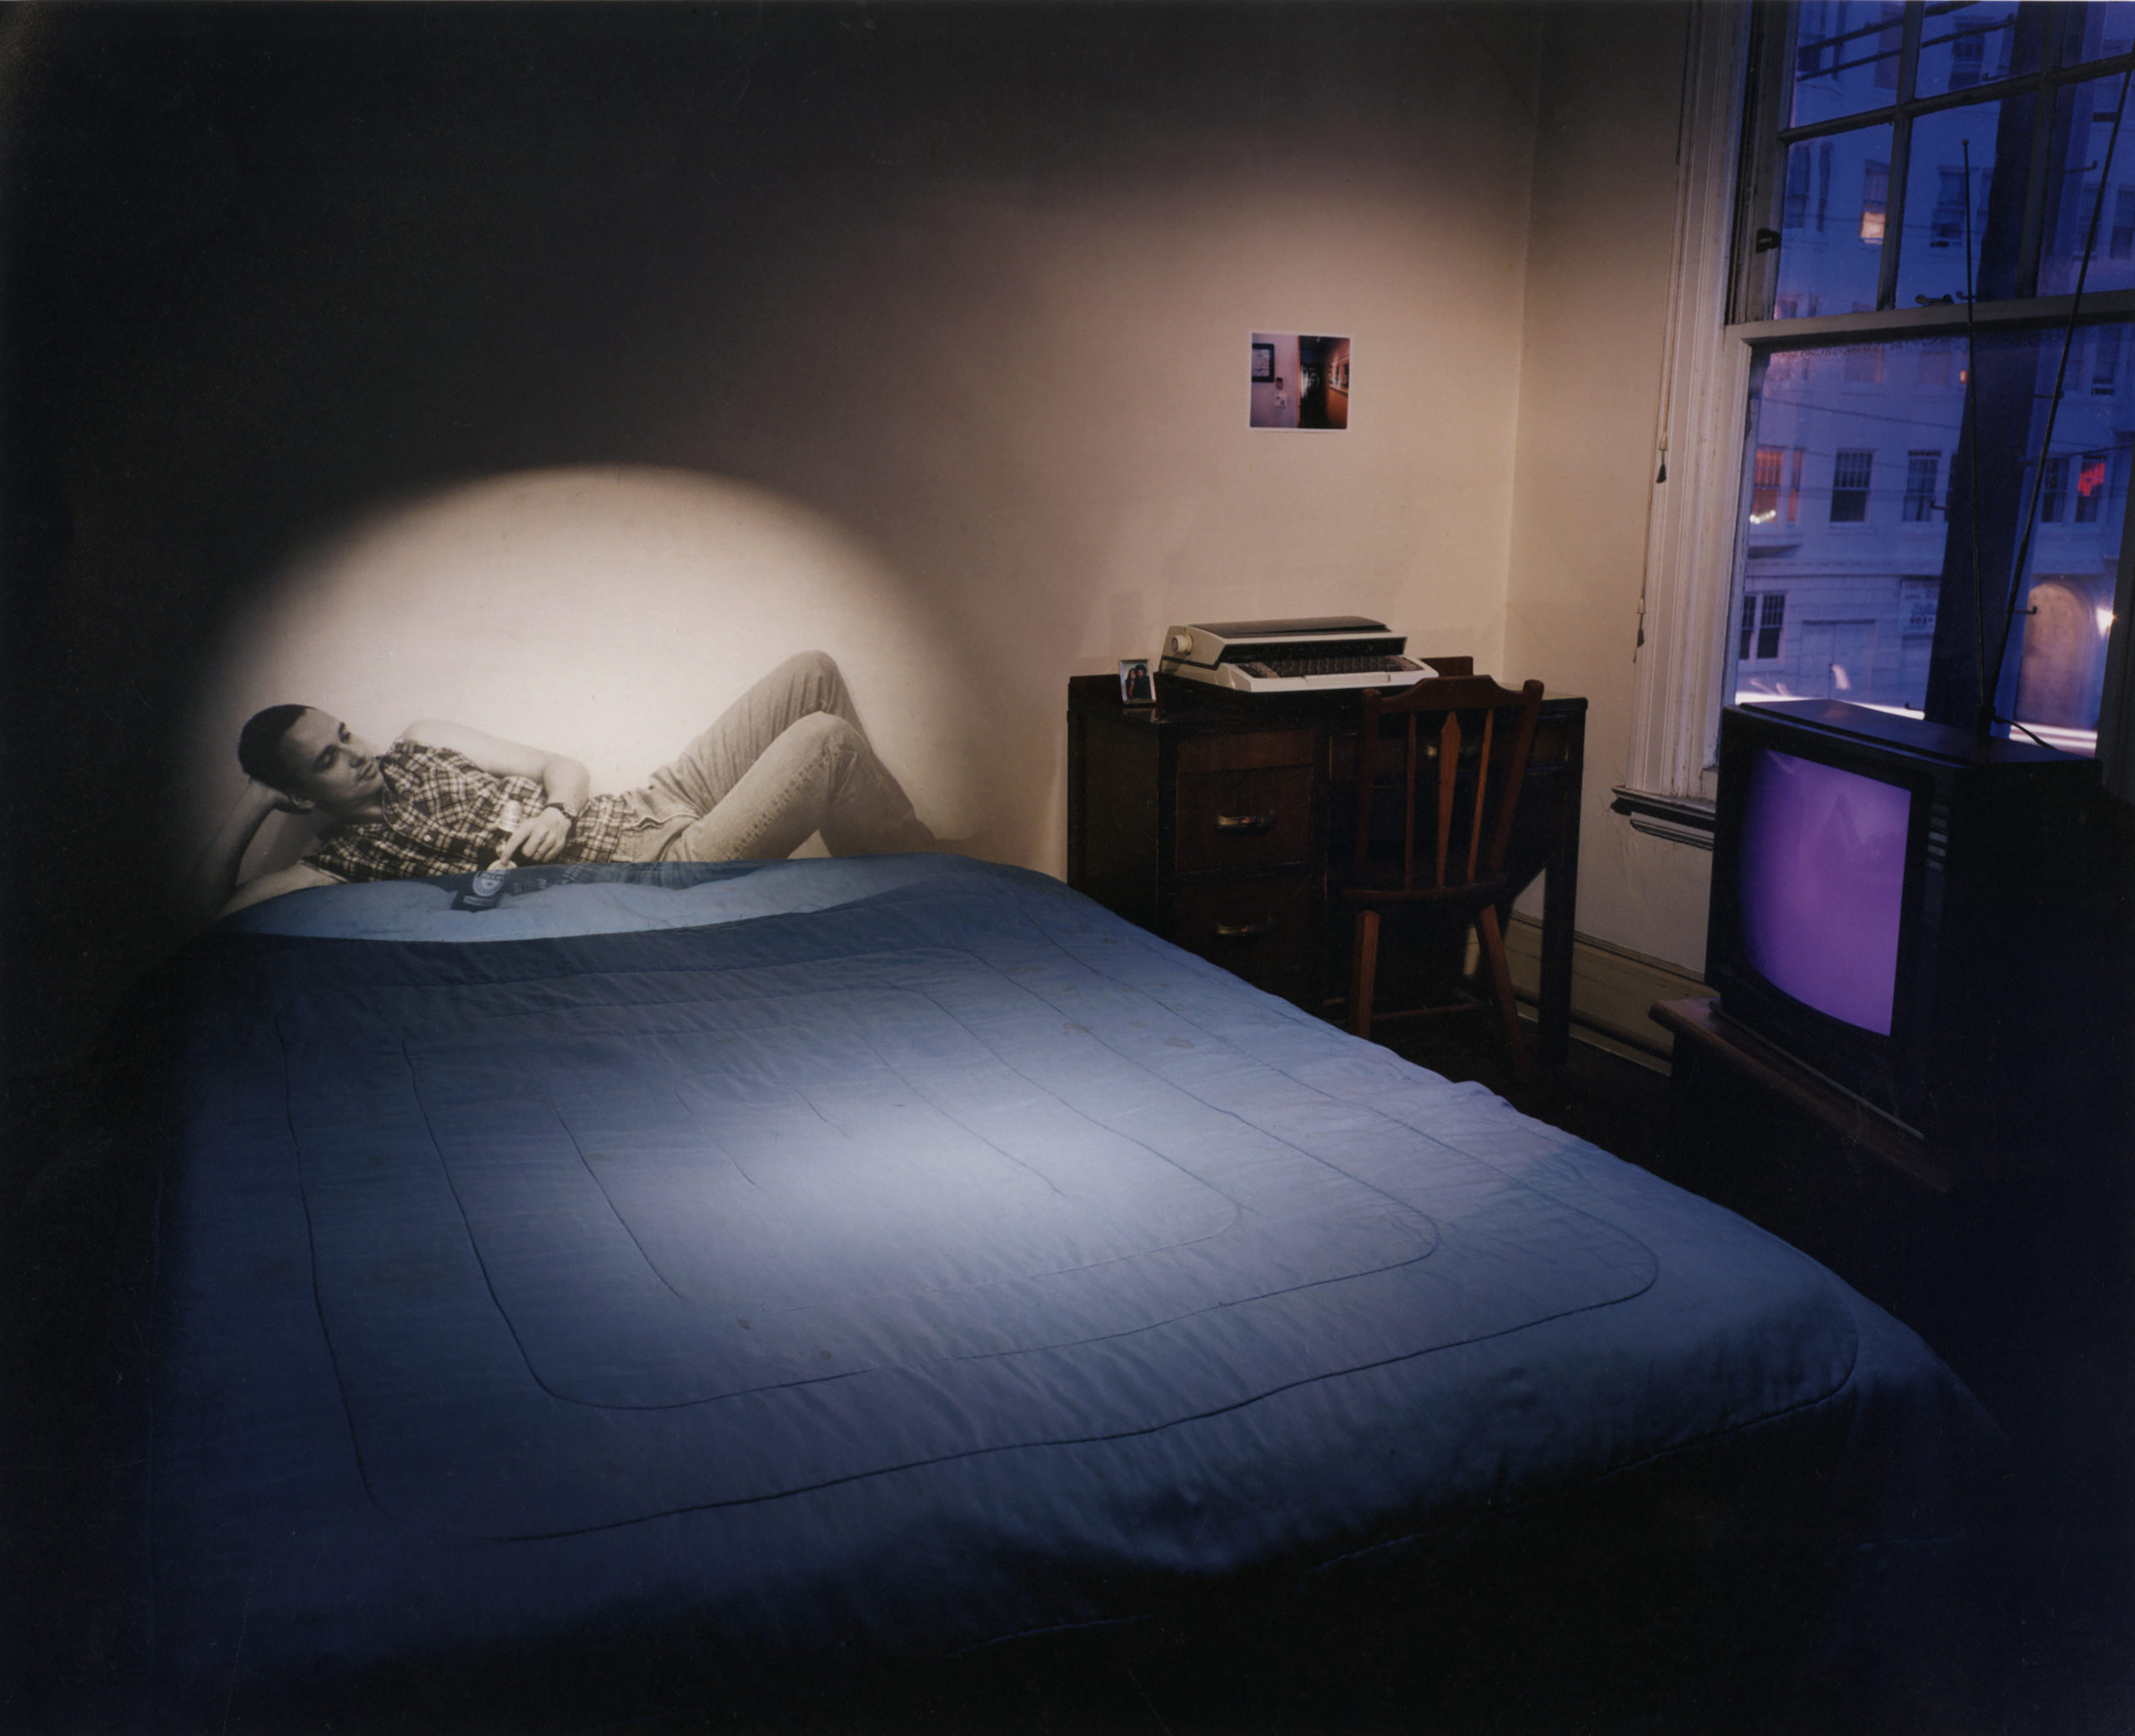 Shimon Attie, UNTITLED MEMORY (SLIDE PROJECTION OF AXEL H.) 1998
Chromogenic photograph, 40 x 47” Image courtesy of Jack Shainman Gallery, New York